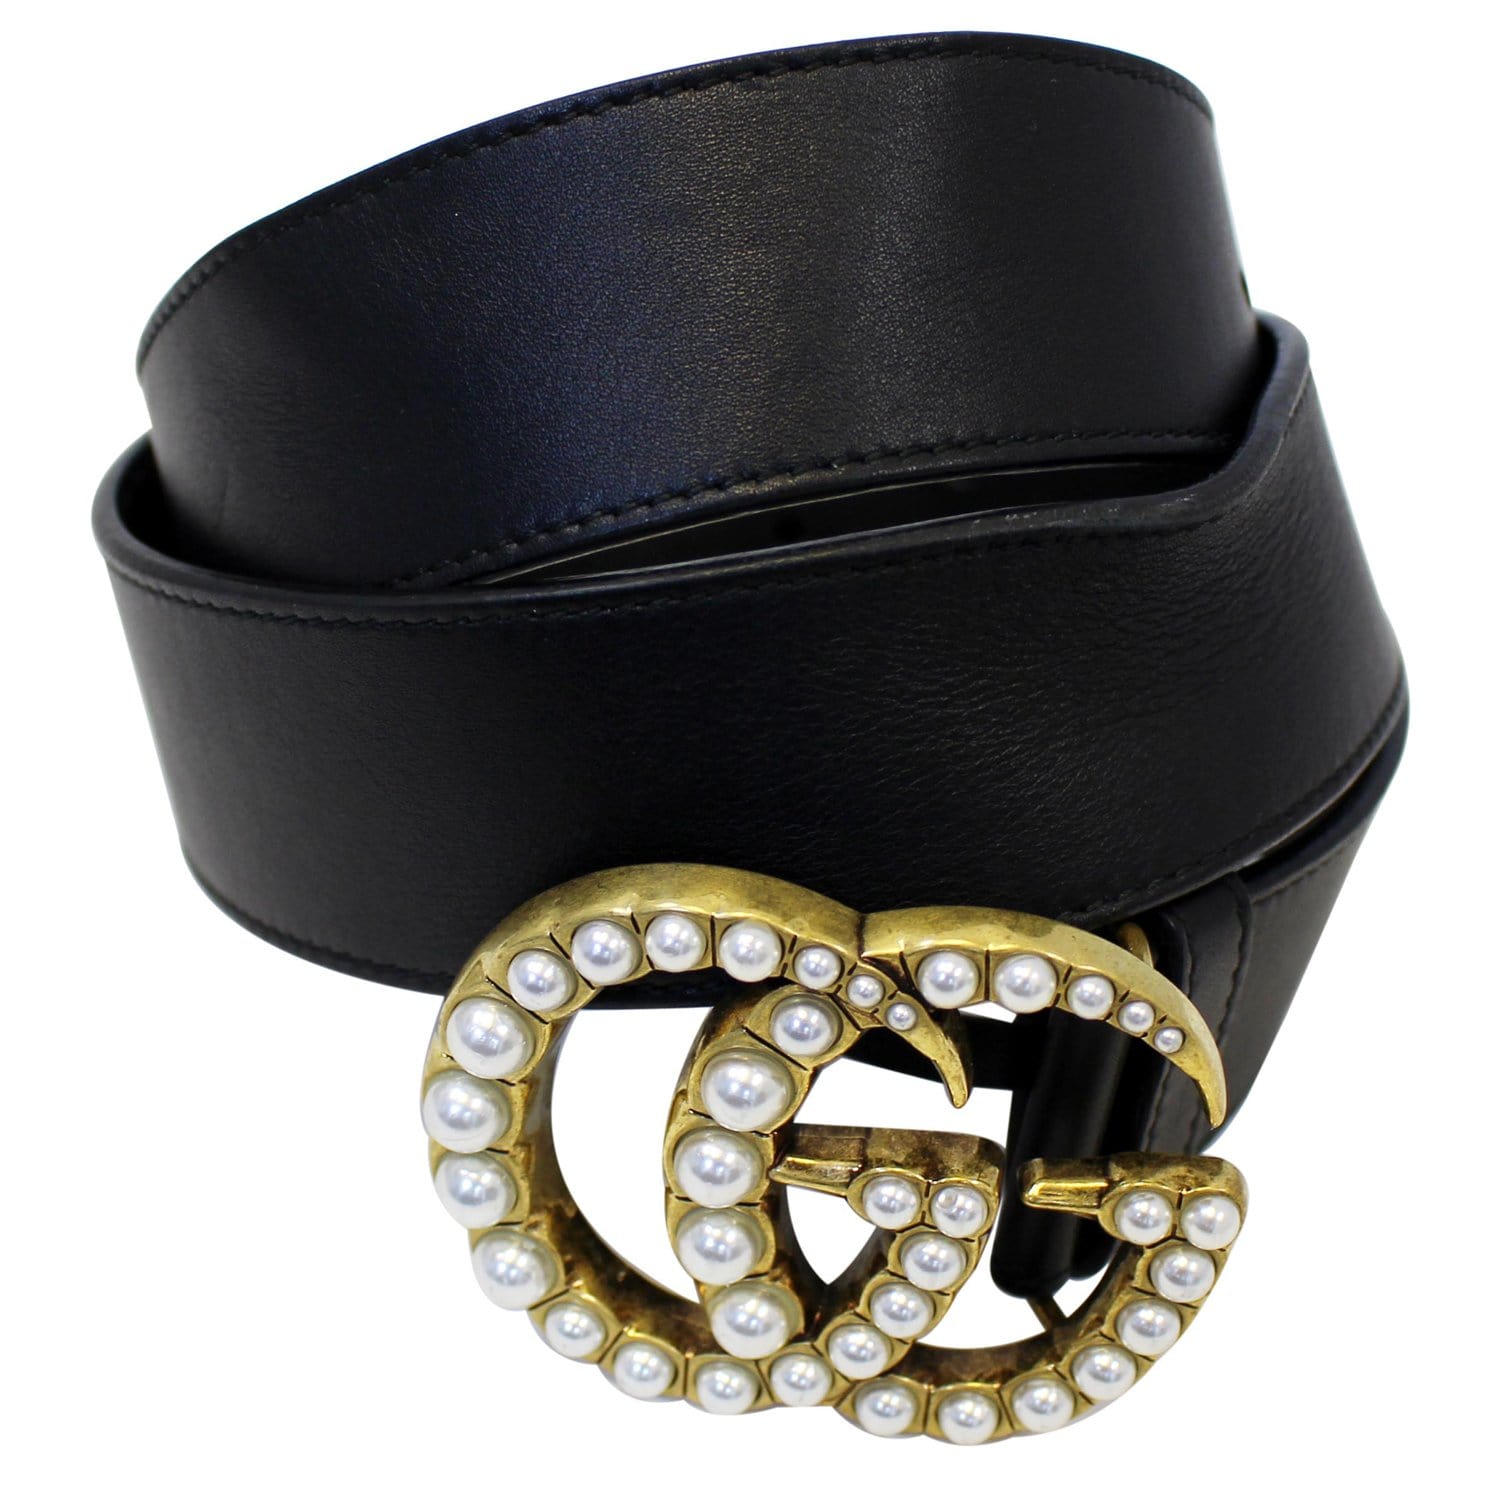 Leather Belt with Pearl Double G / Leather Belt with Double G buckle